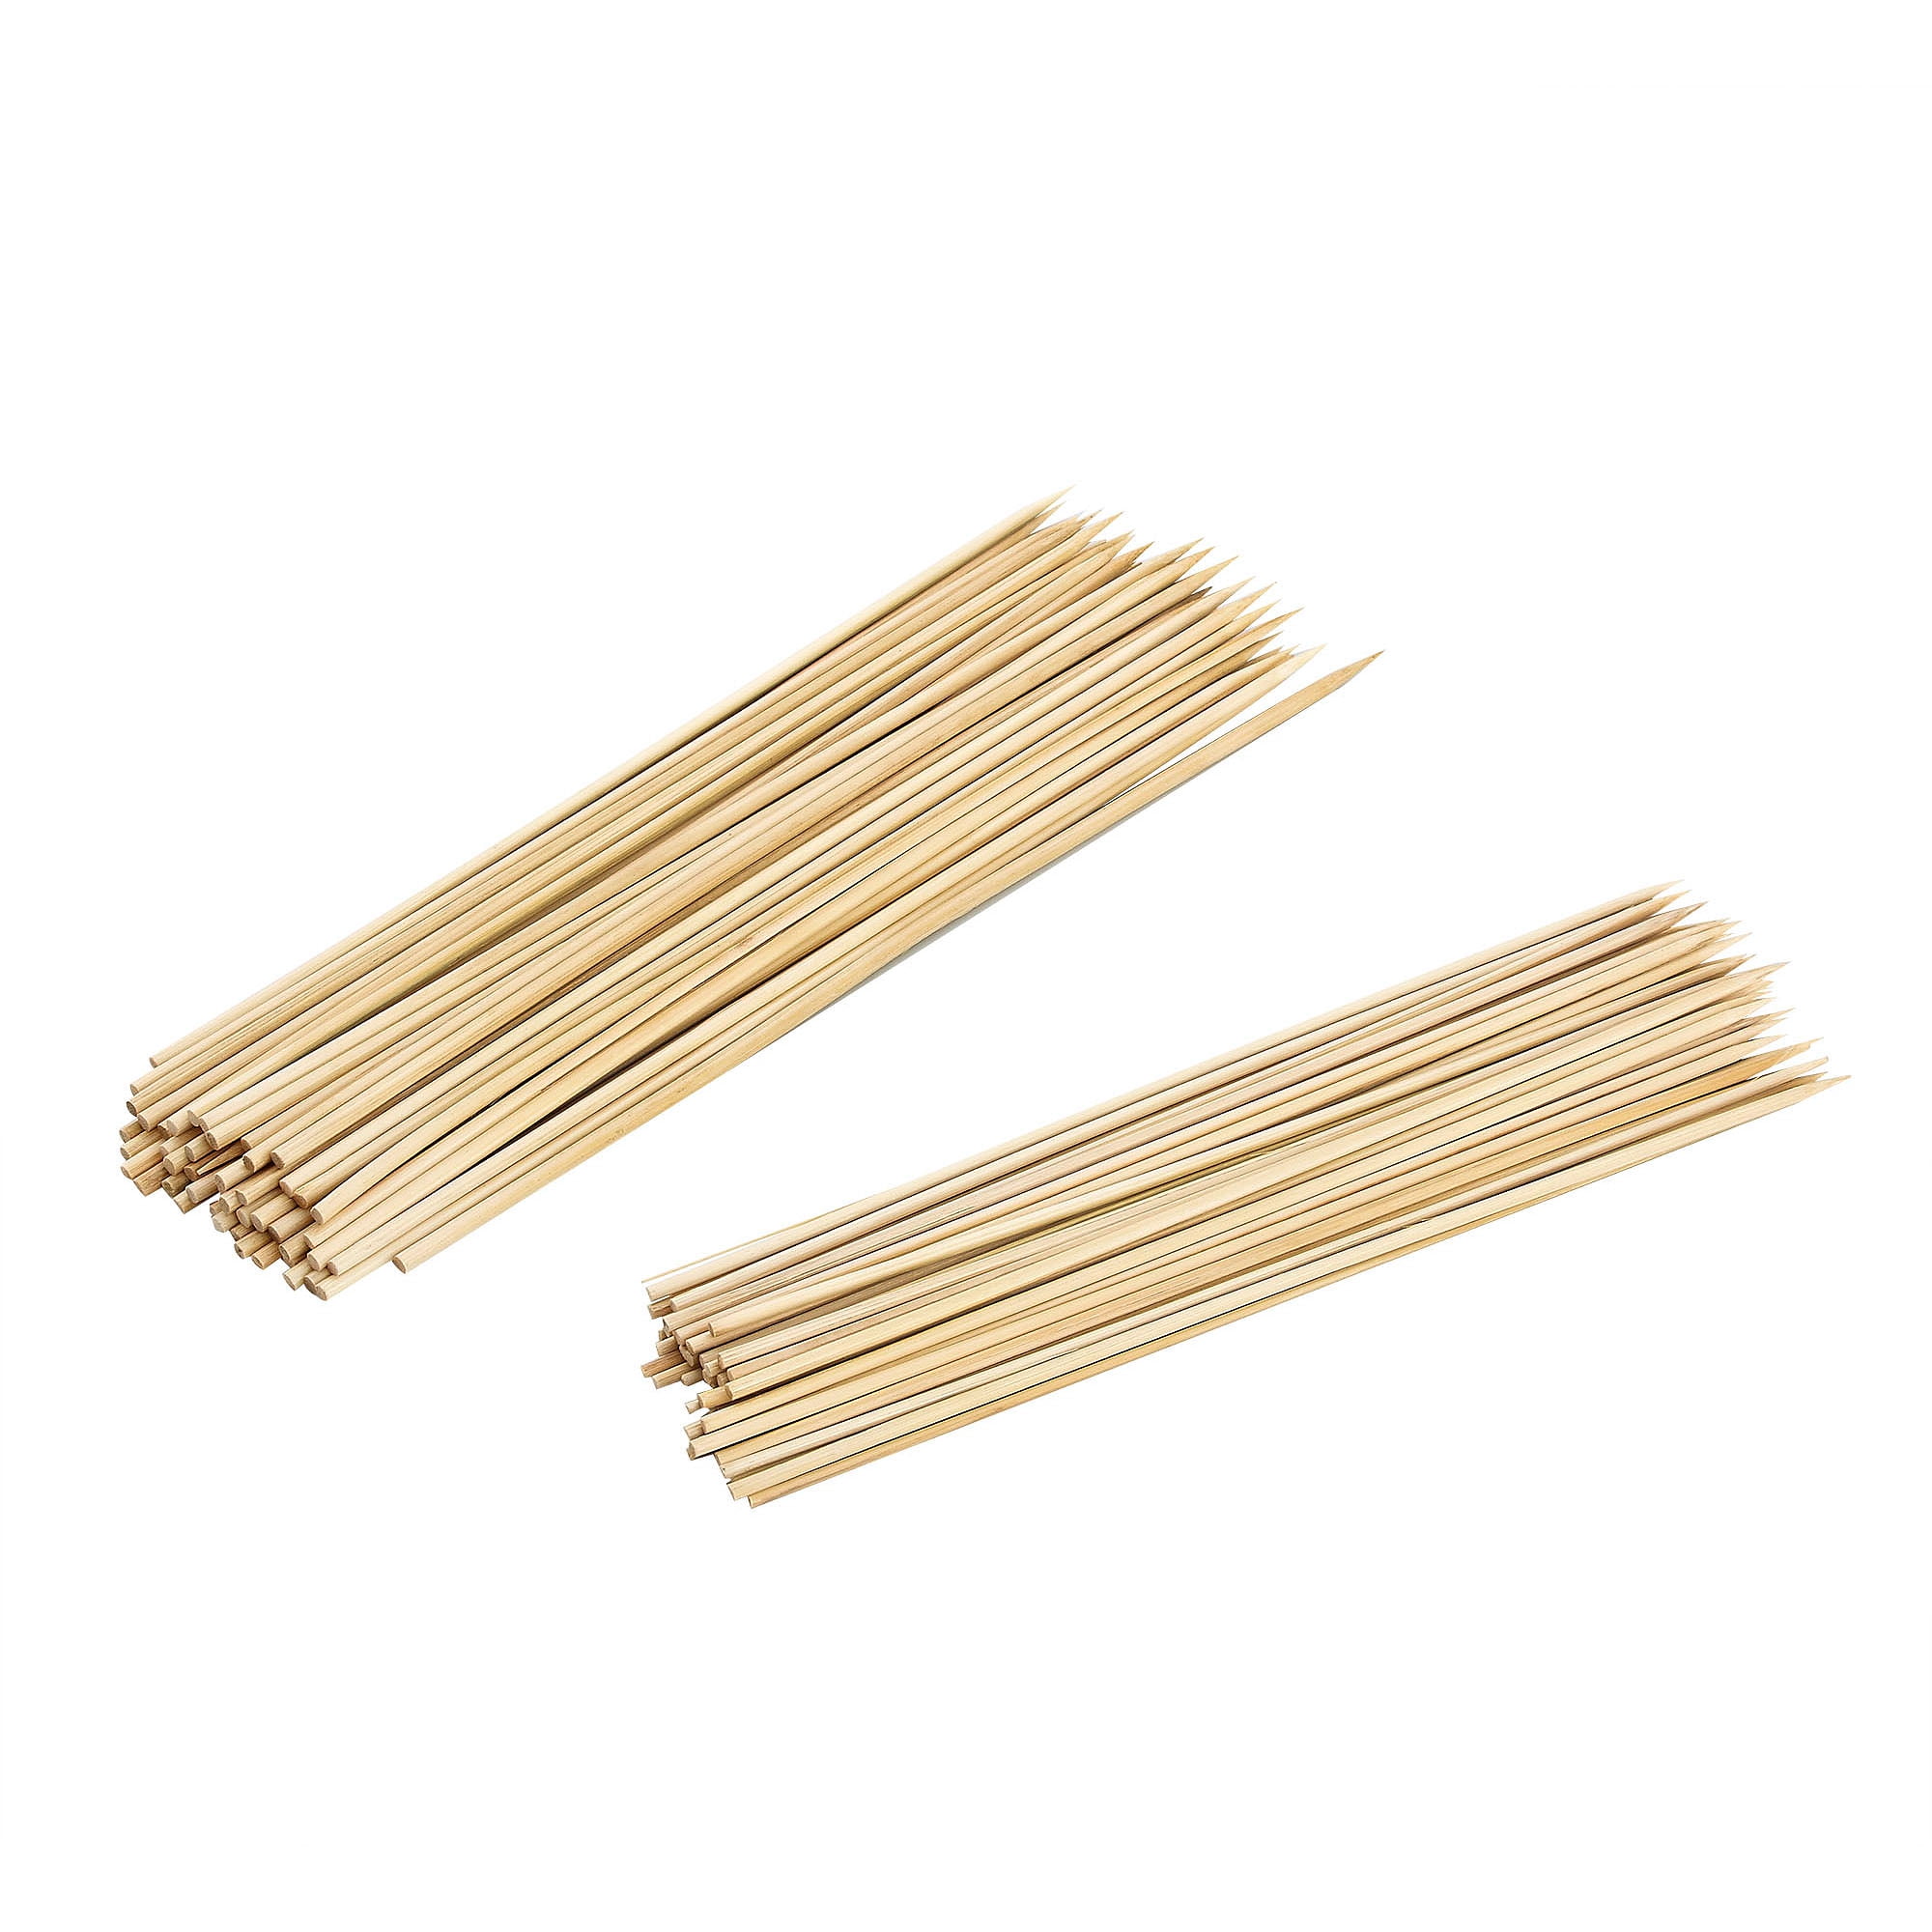 50 Count per Pack Jacent Jumbo 12 Inch Bamboo Skewers 1 Pack